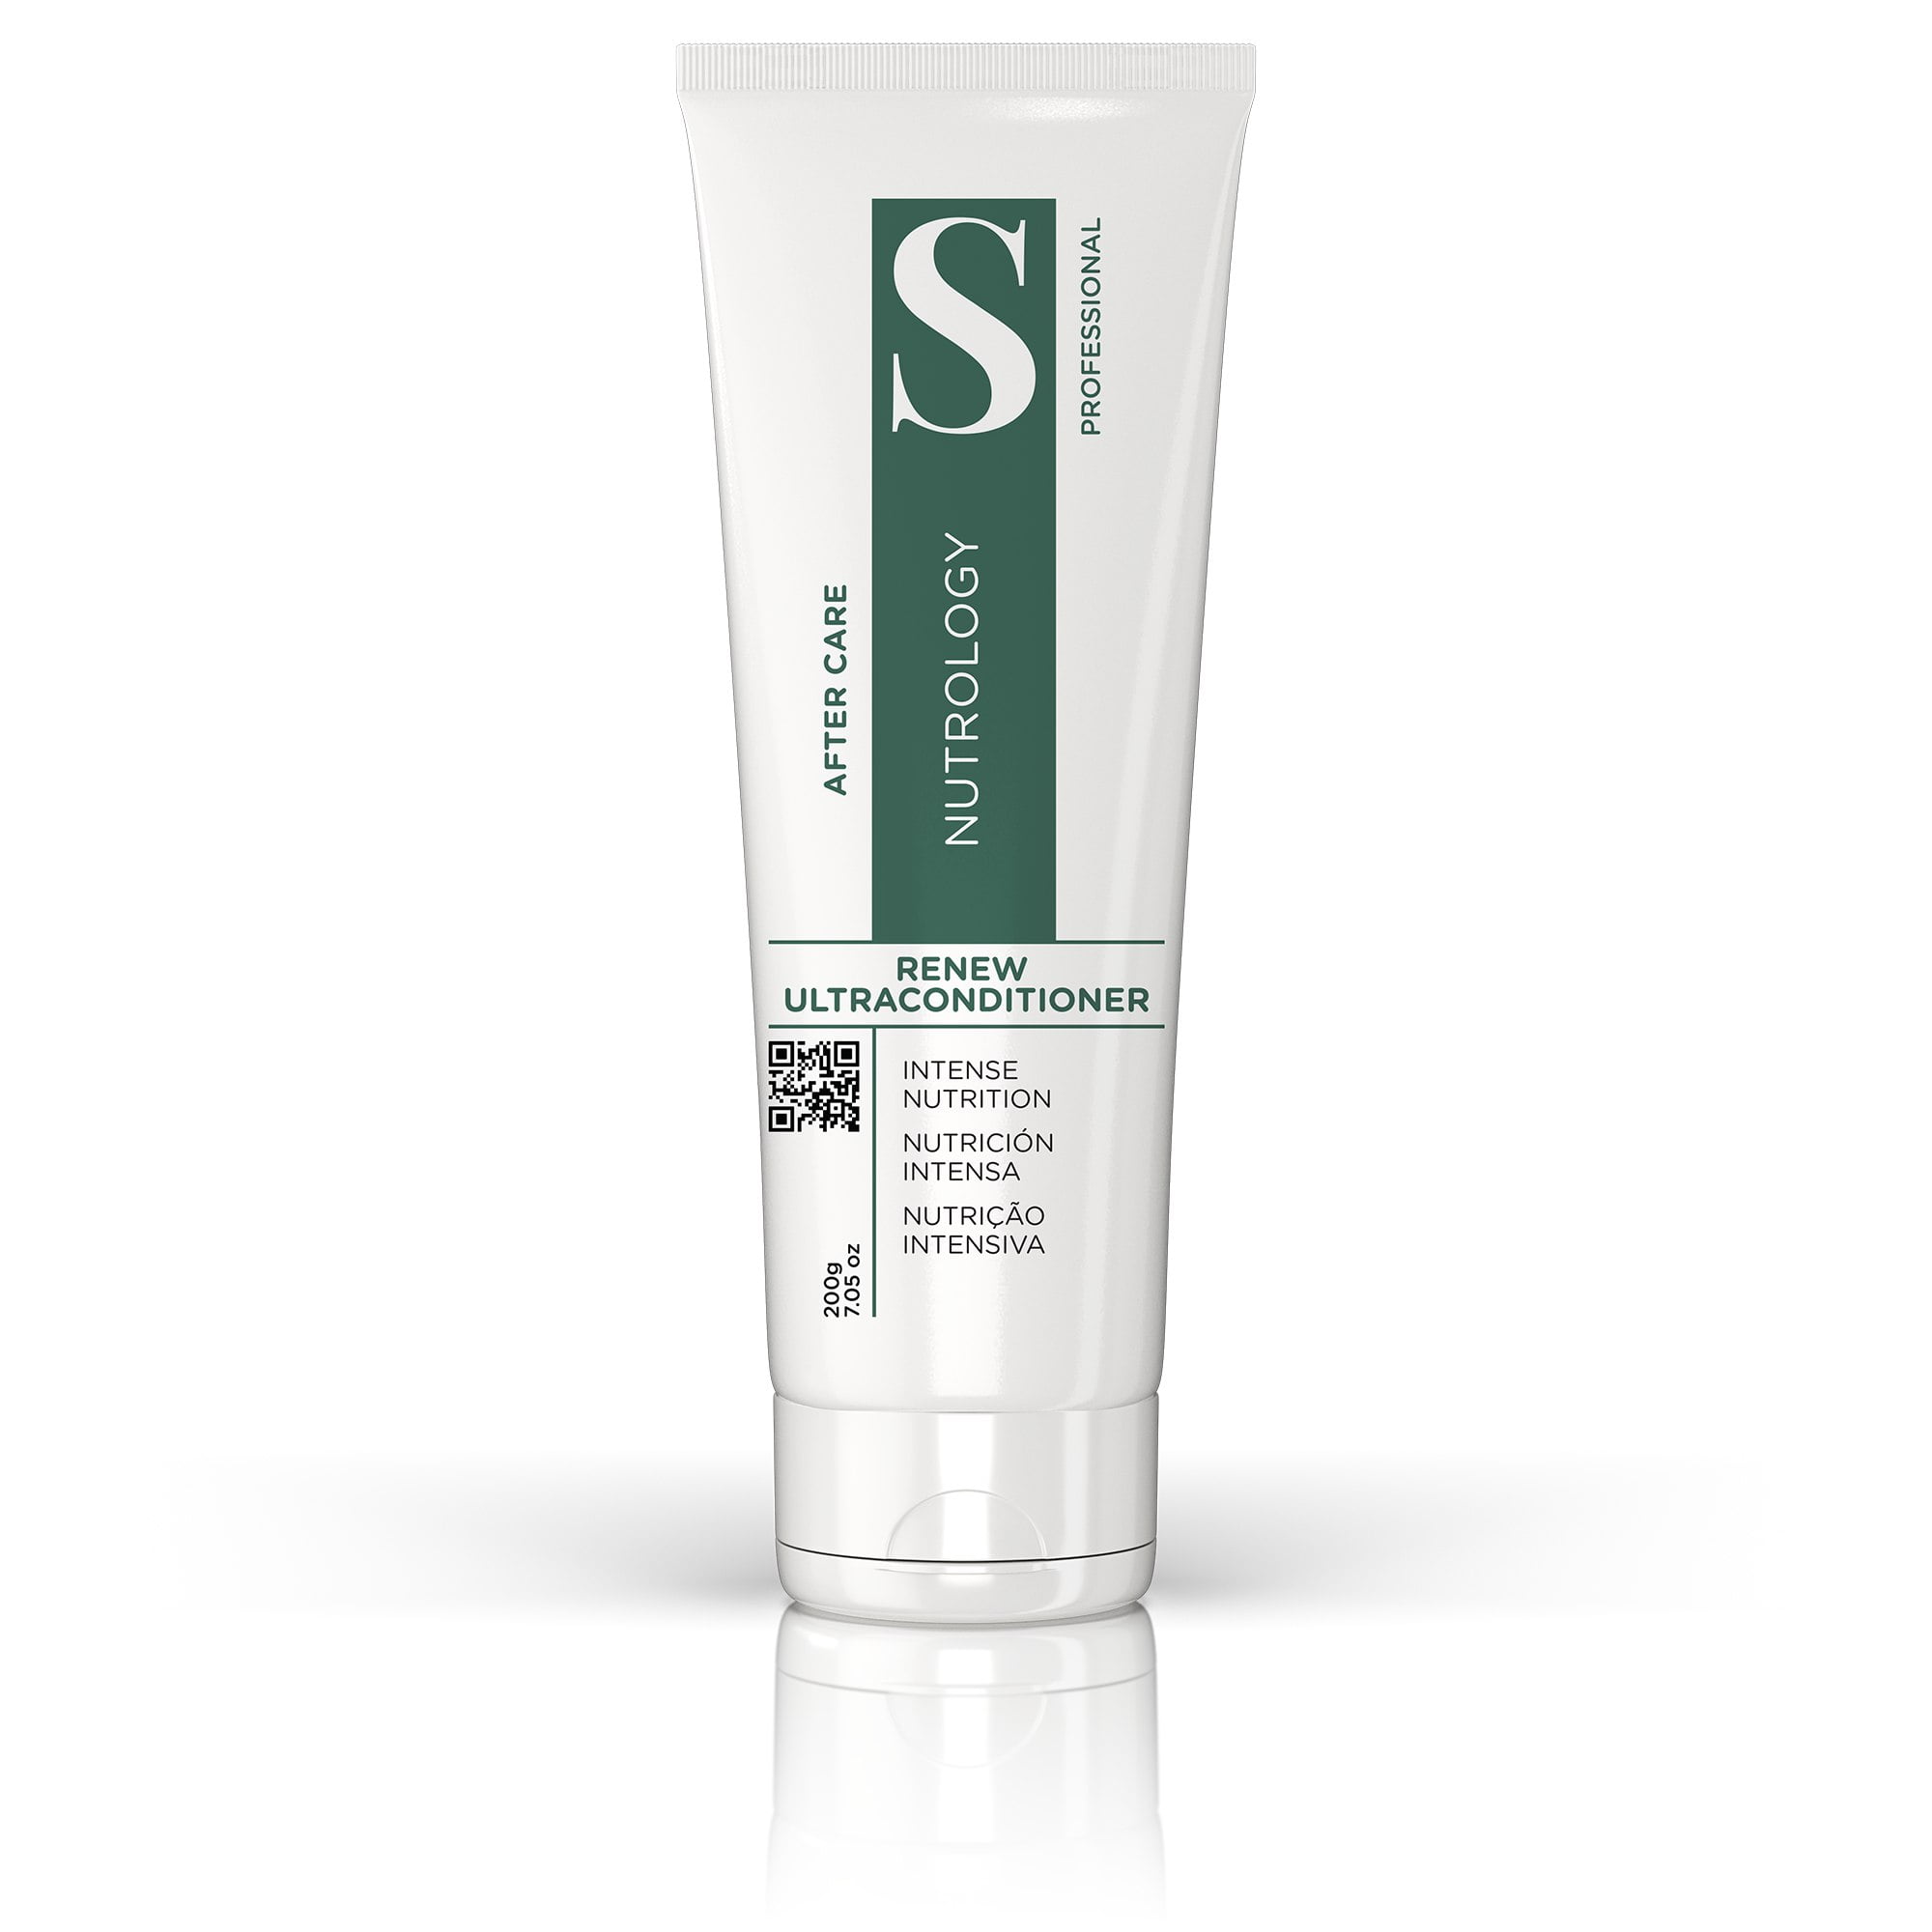 S PROFISSIONAL NUTROLOGY RENEW ULTRACONDITIONER AFTER CARE ( MÁSCARA ) - 230ML		